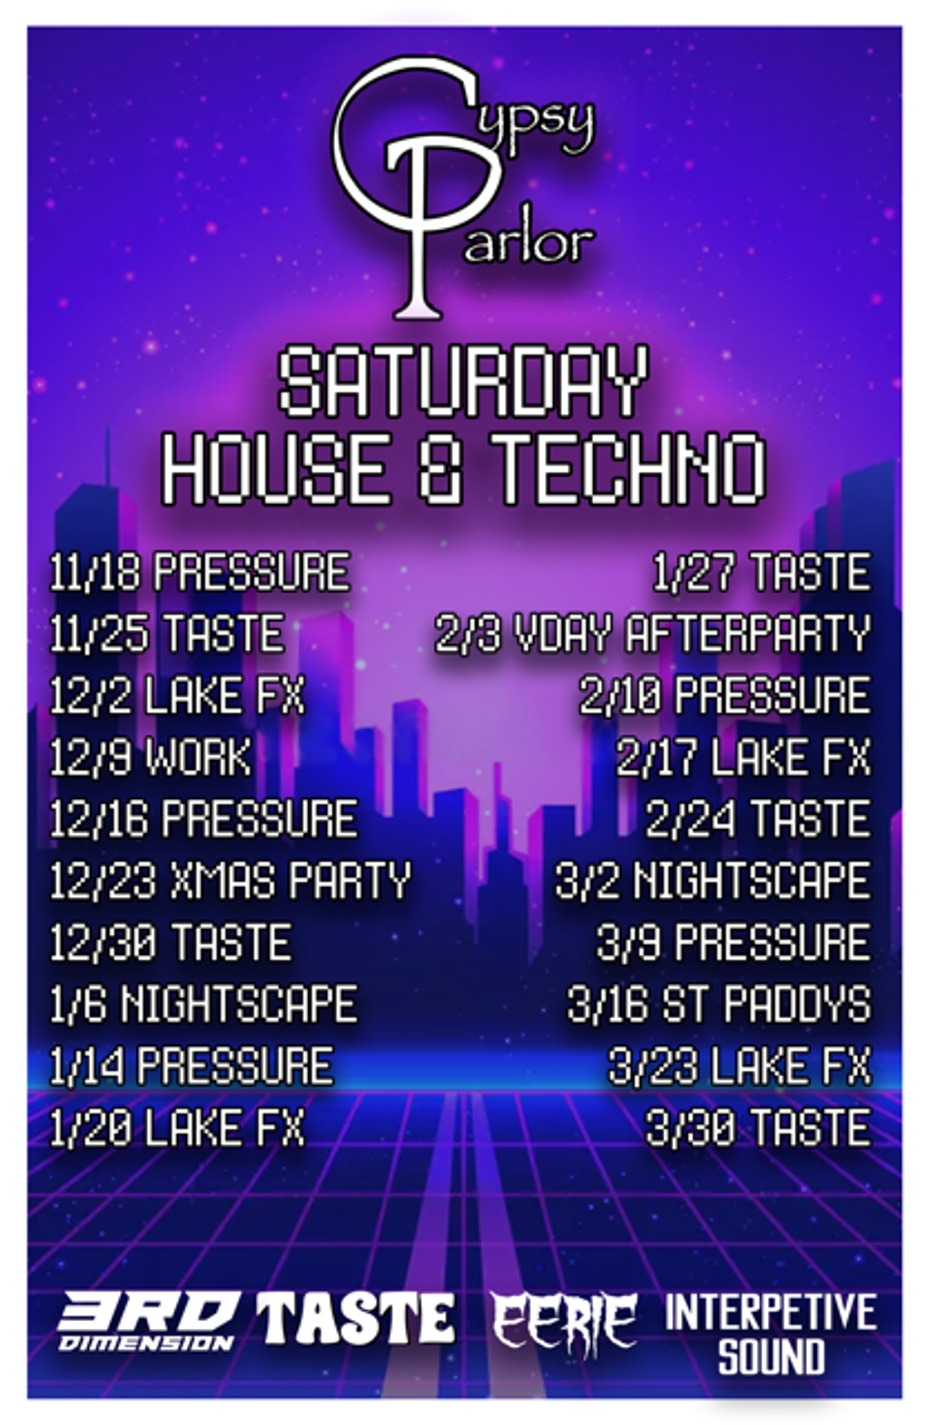 House and Techno Music  Every Saturday event photo